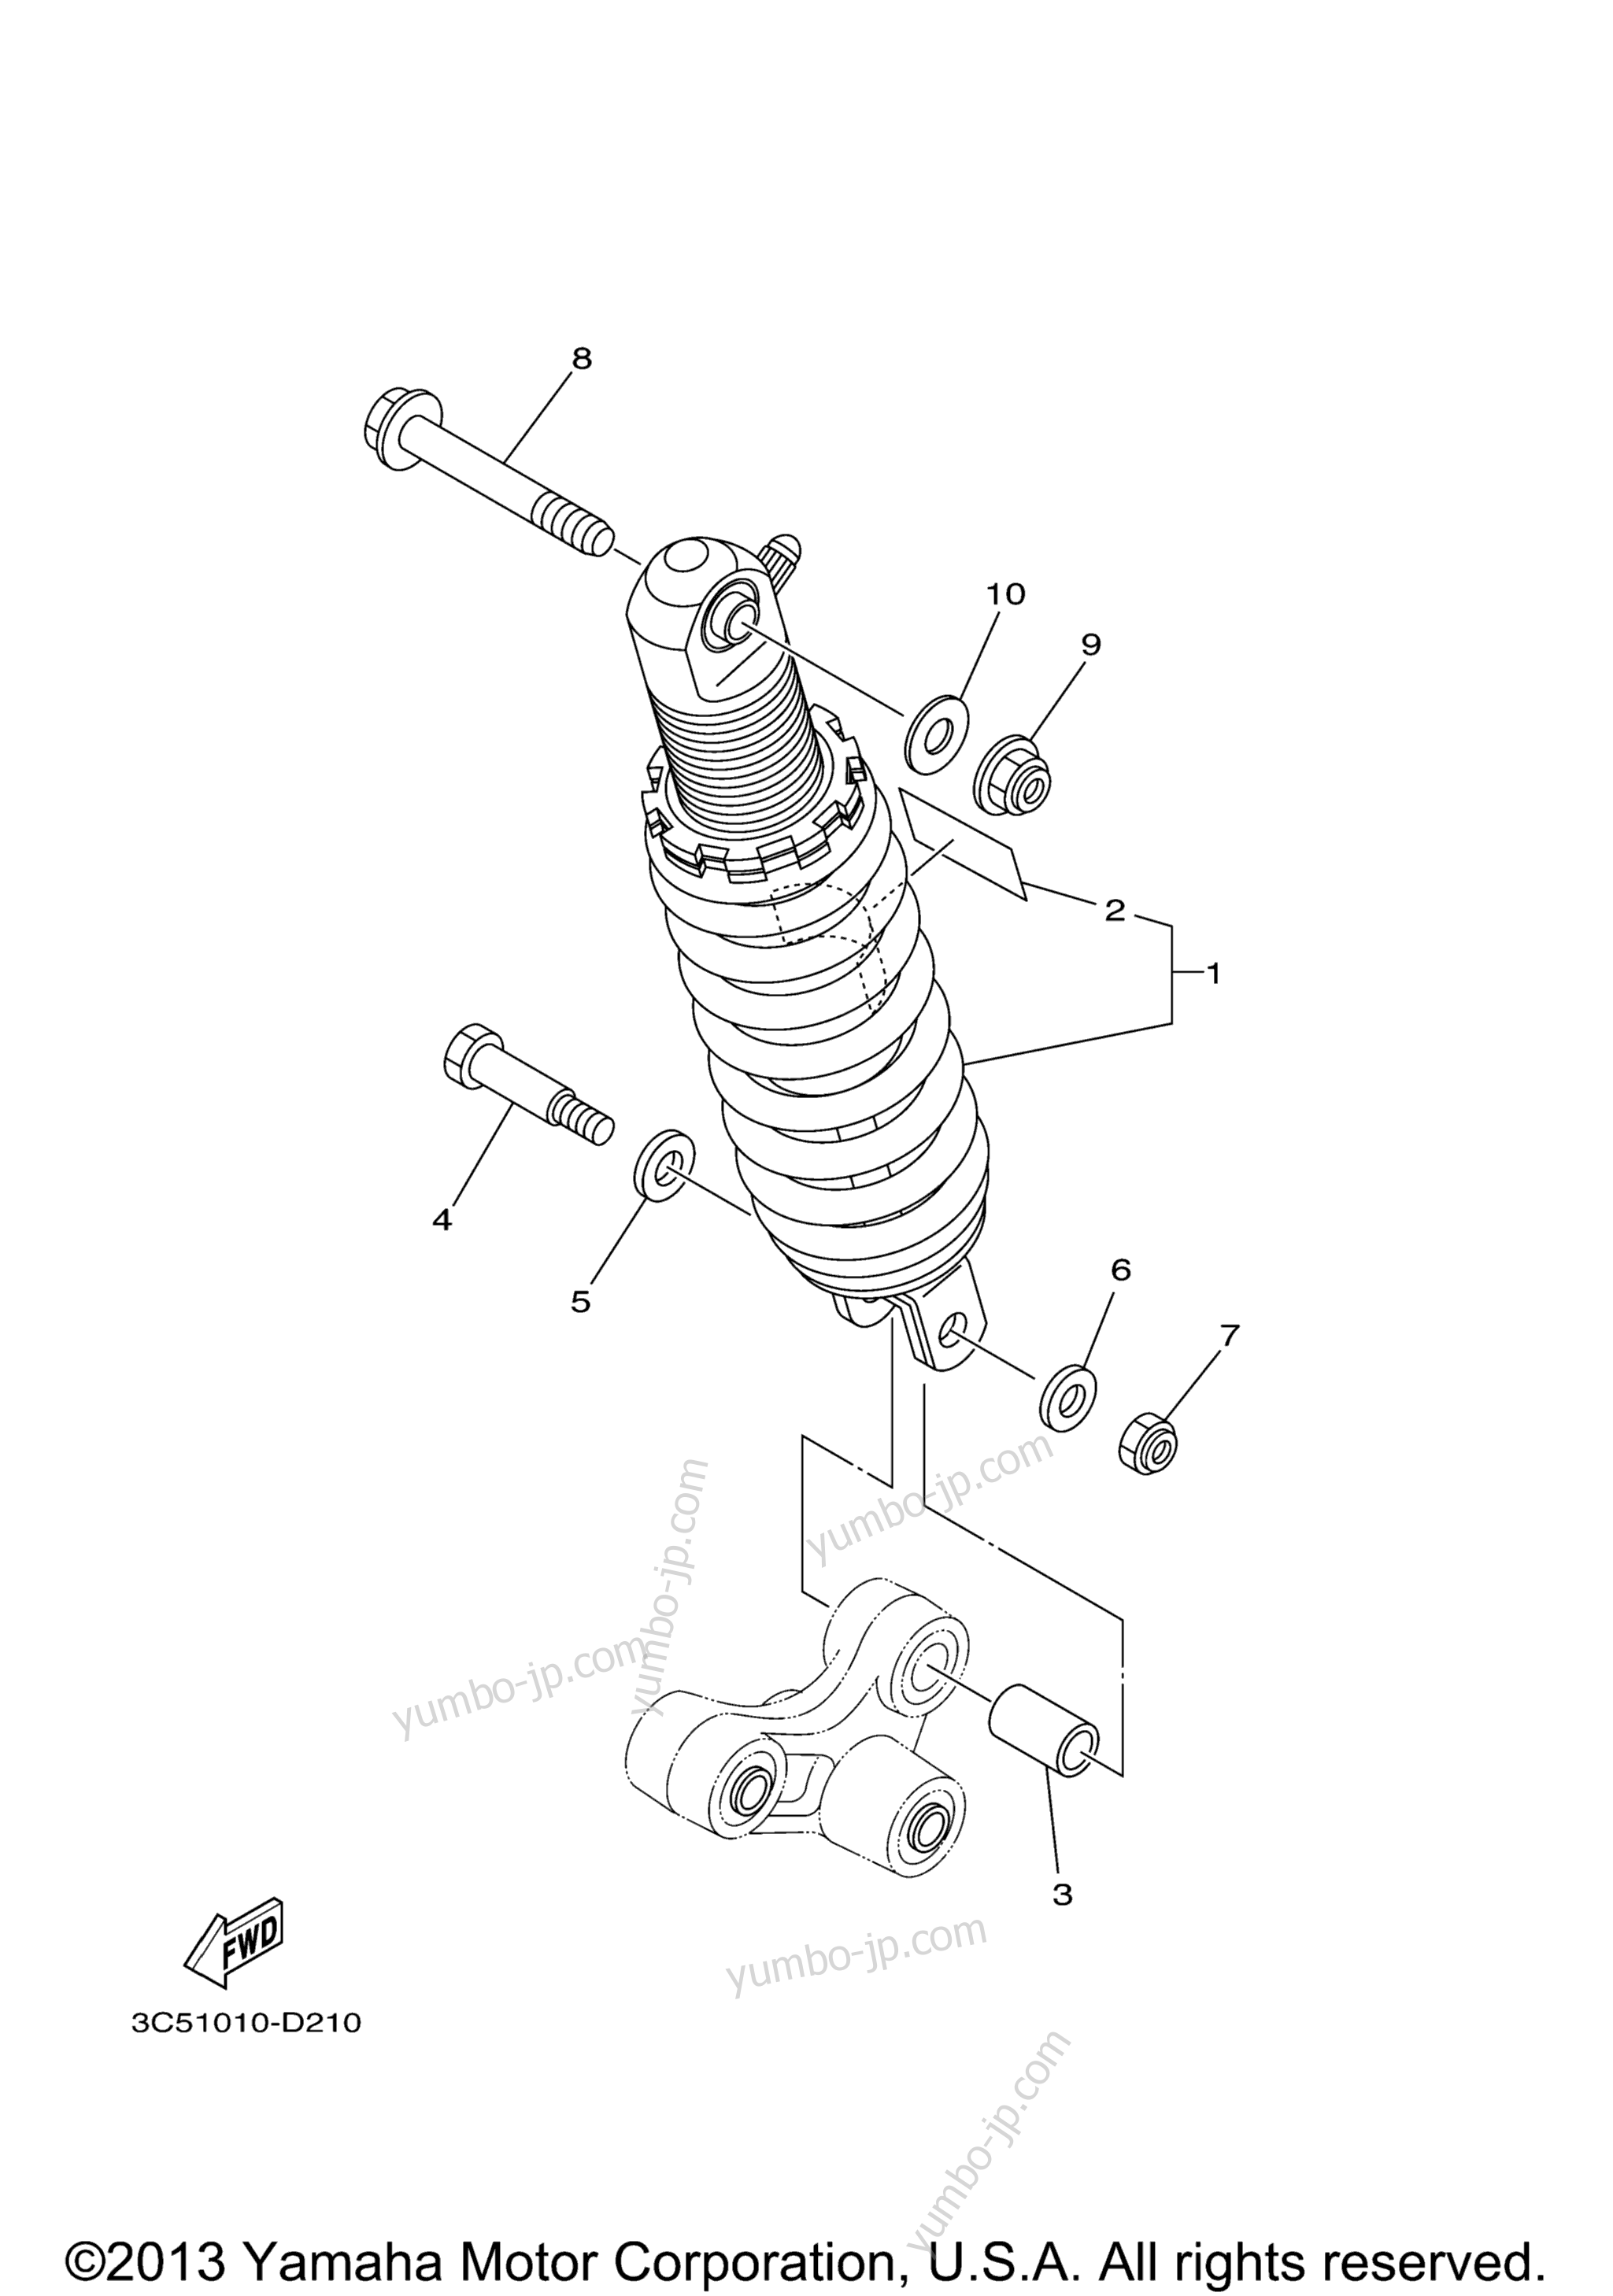 Rear Suspension for motorcycles YAMAHA XT250 (XT250A) 2011 year